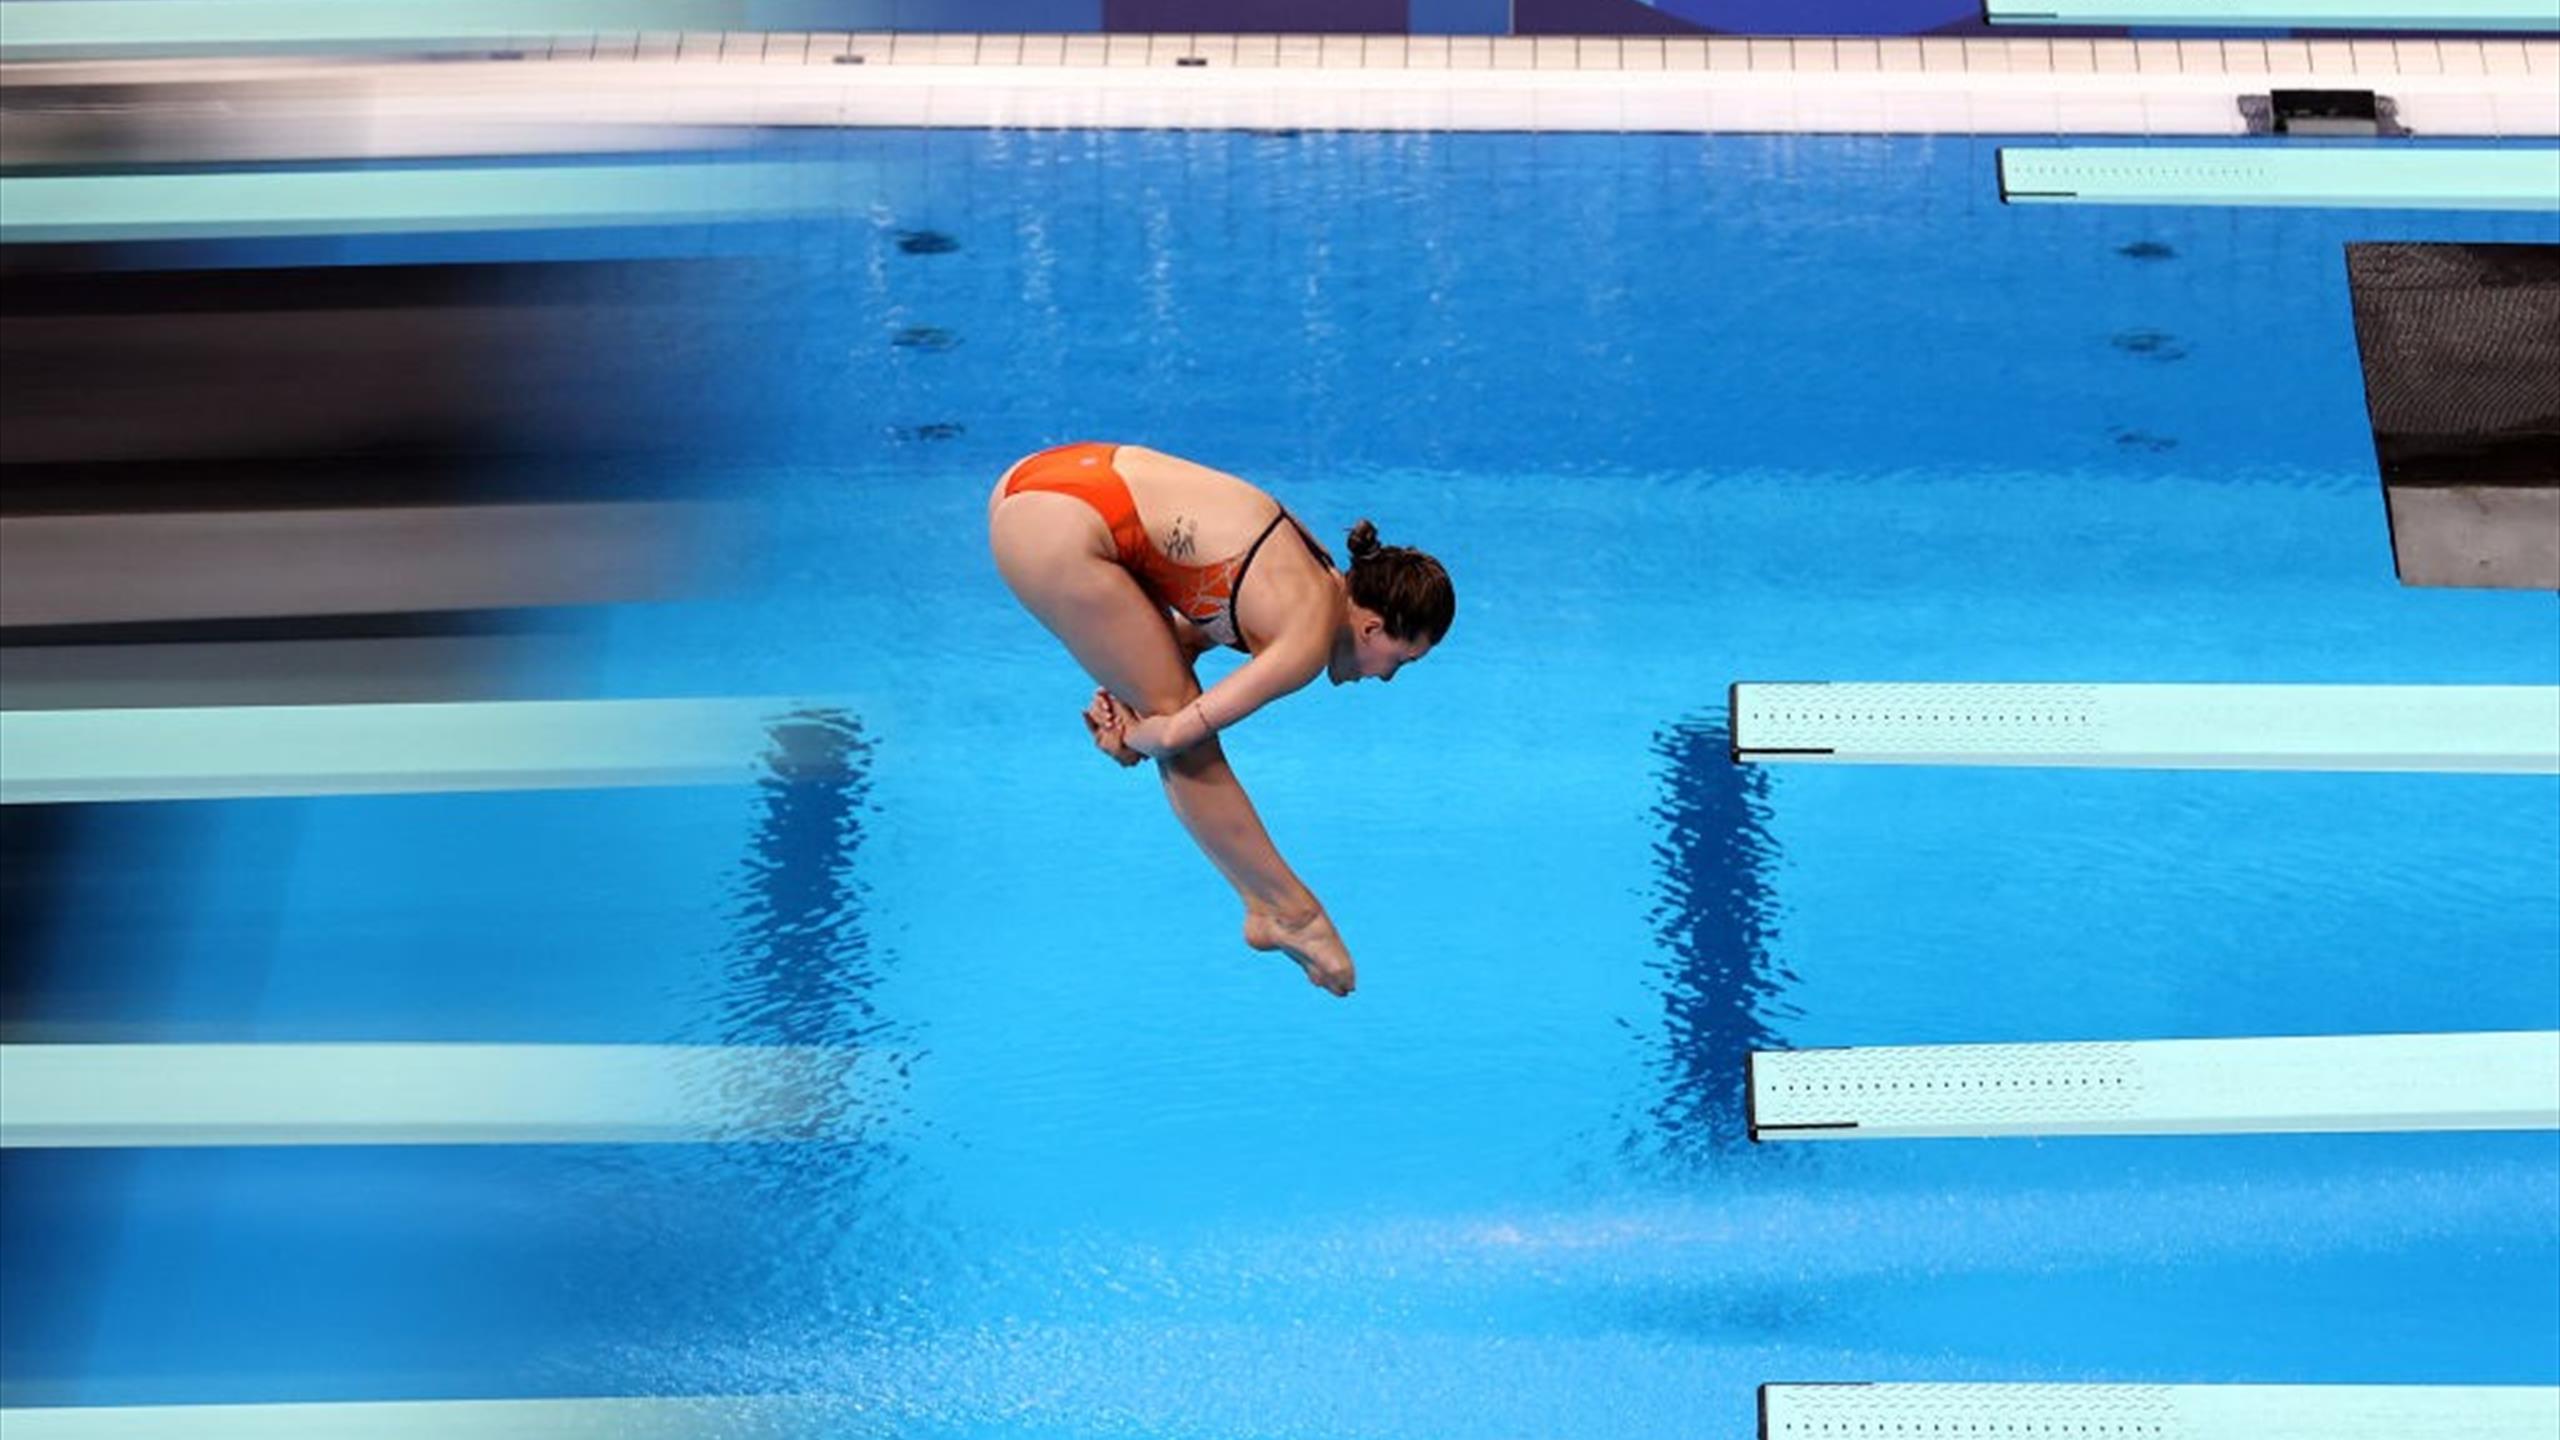 Tokyo 2020 |  Waseem 5th place for Inge Jansen in the diving final